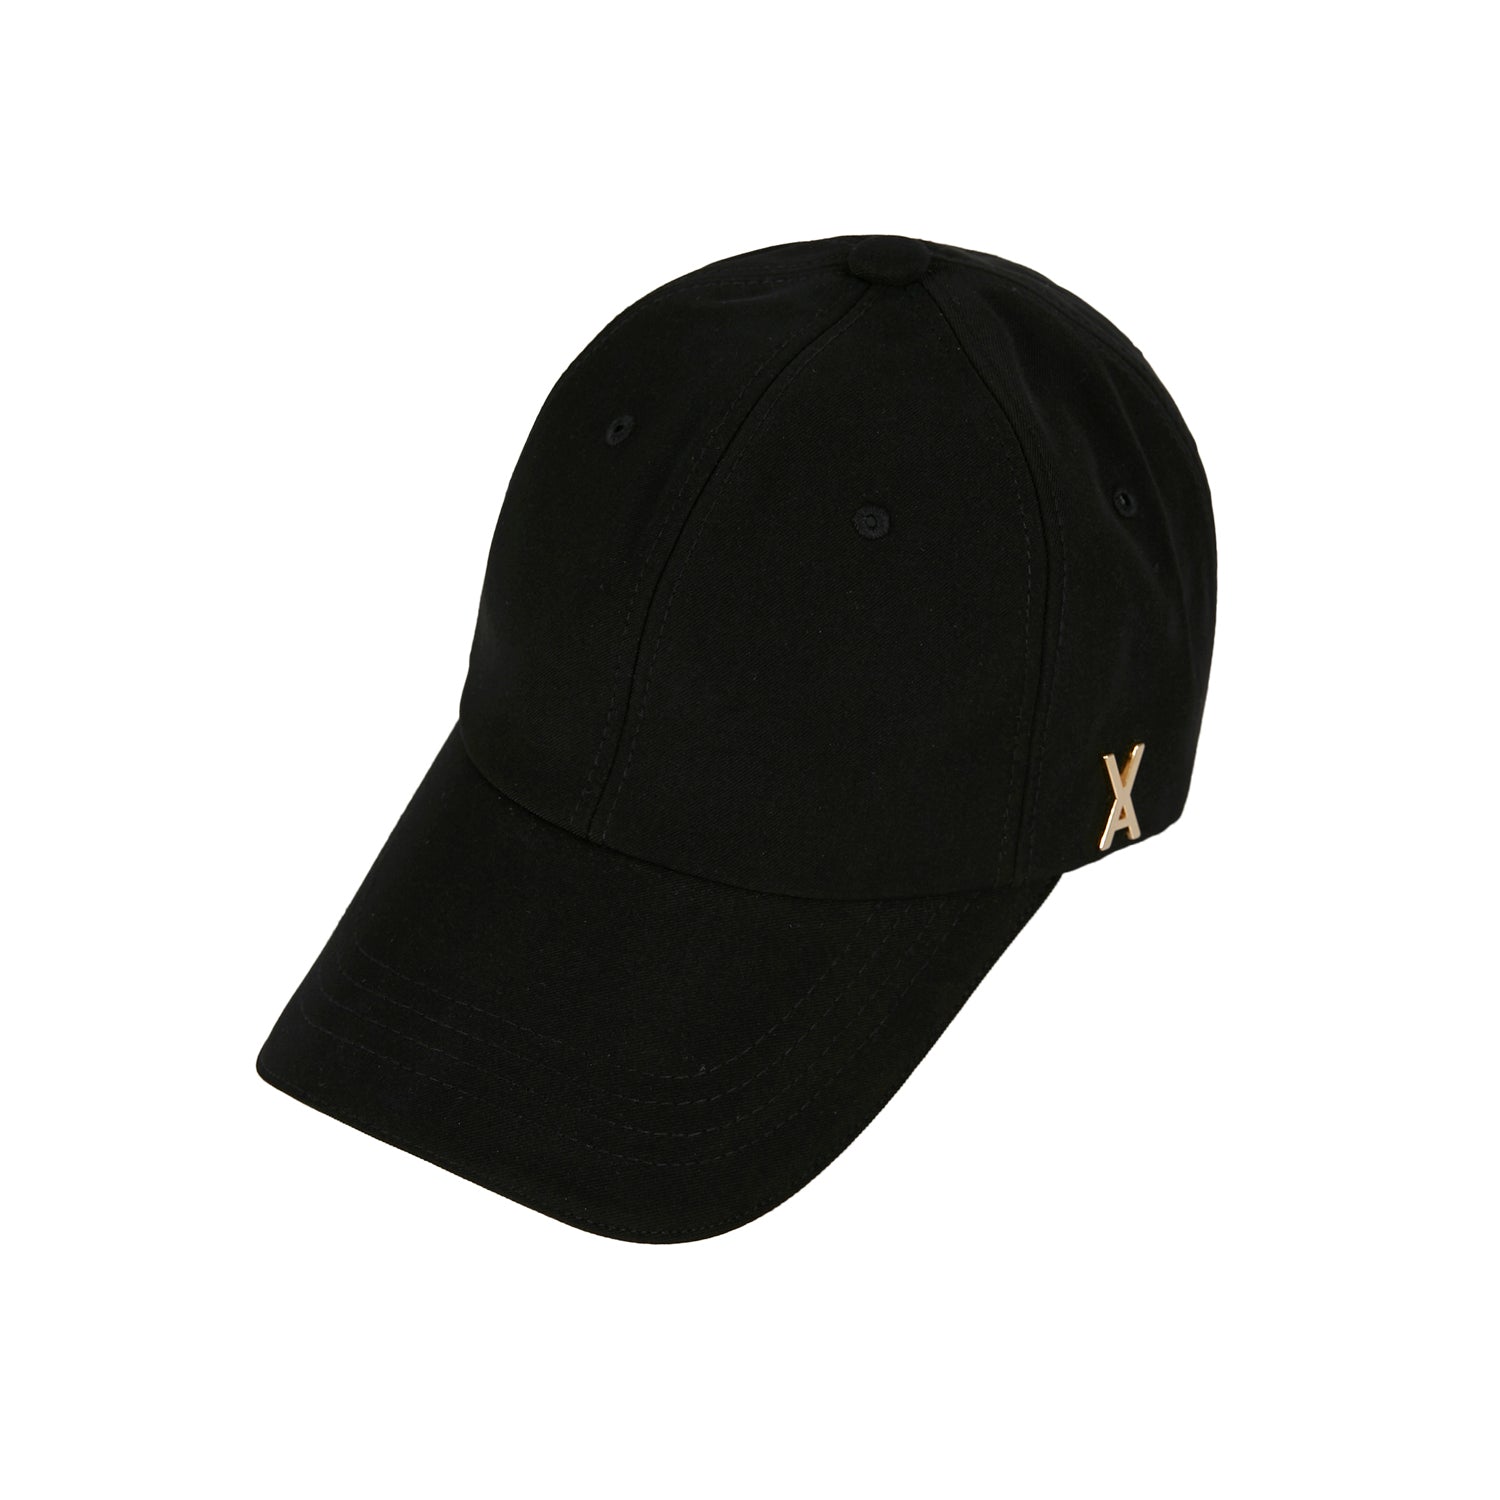 Gold stud over fit ball cap